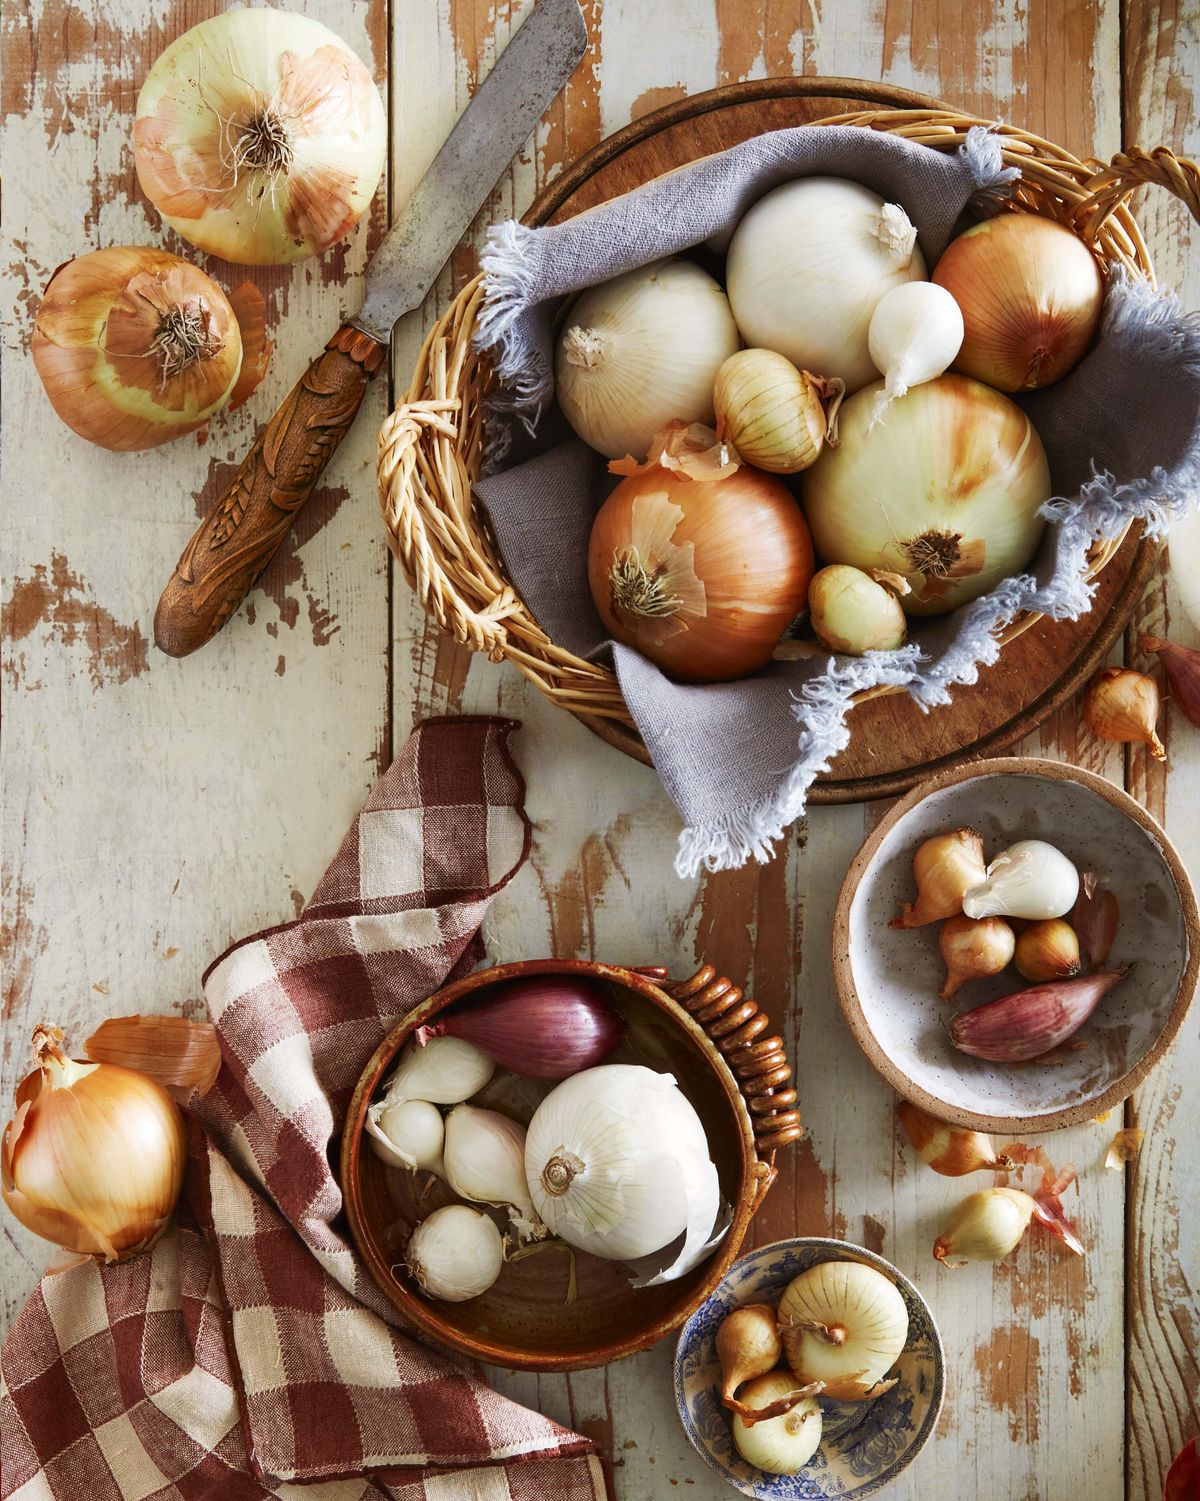 assortment of onions in baskets and bowls